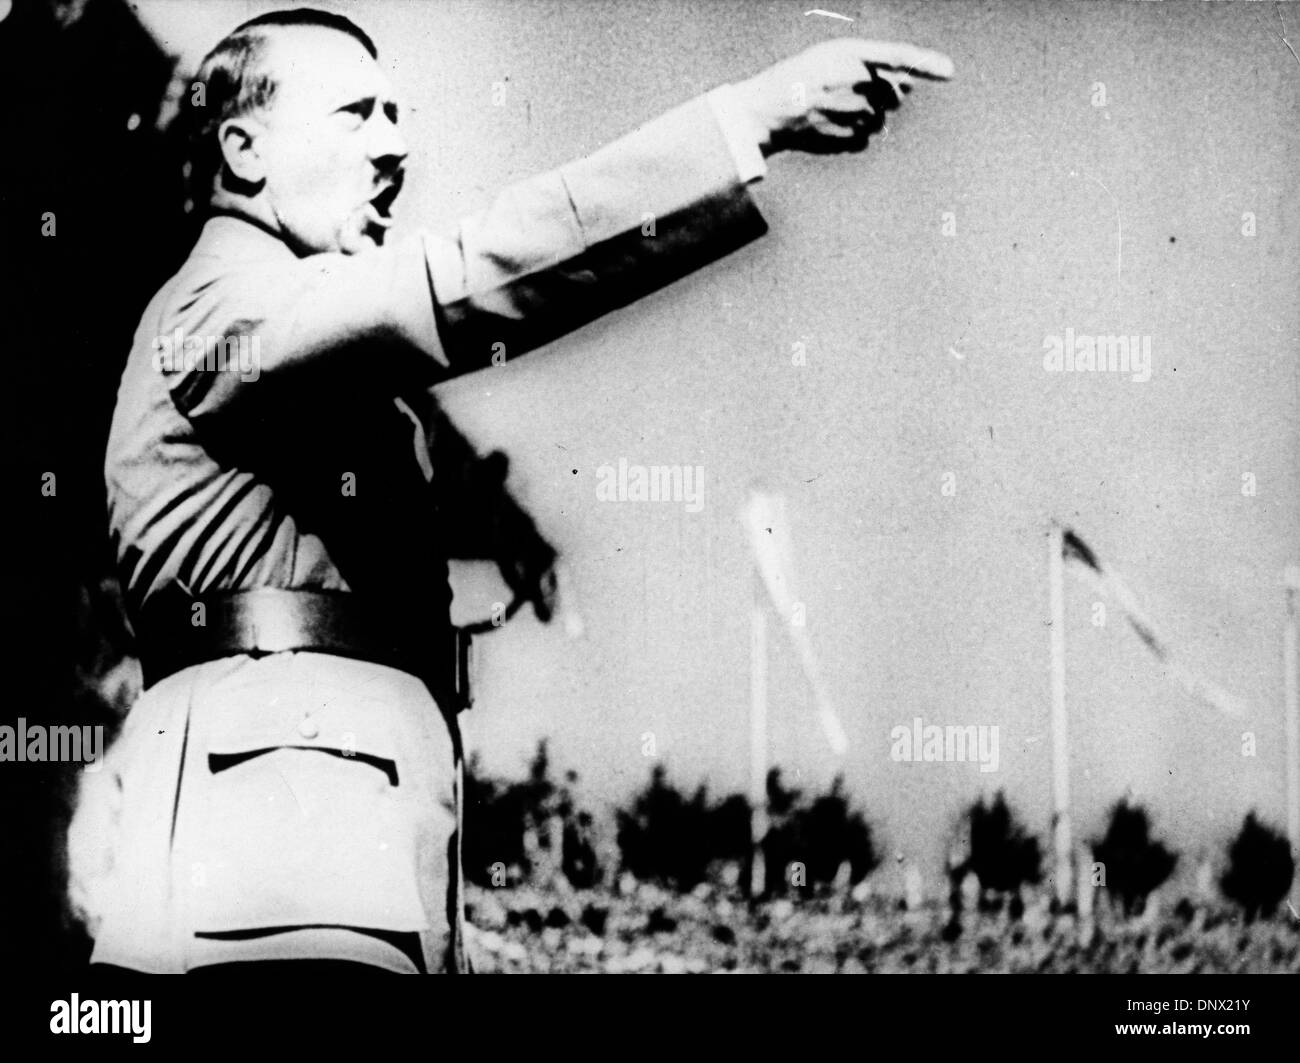 Feb. 15, 1939 - Berlin, Germany - ADOLF HITLER (April 20, 1889ÐApril 30, 1945) was the Fuhrer und Reichskanzler (Leader and Imperial chancellor) of Germany from 1933 to his death. He was leader of the National Socialist German Workers Party (NSDAP), better known as the Nazi Party. At the height of his power, the armies of Nazi Germany and its Axis Powers dominated much of Europe du Stock Photo